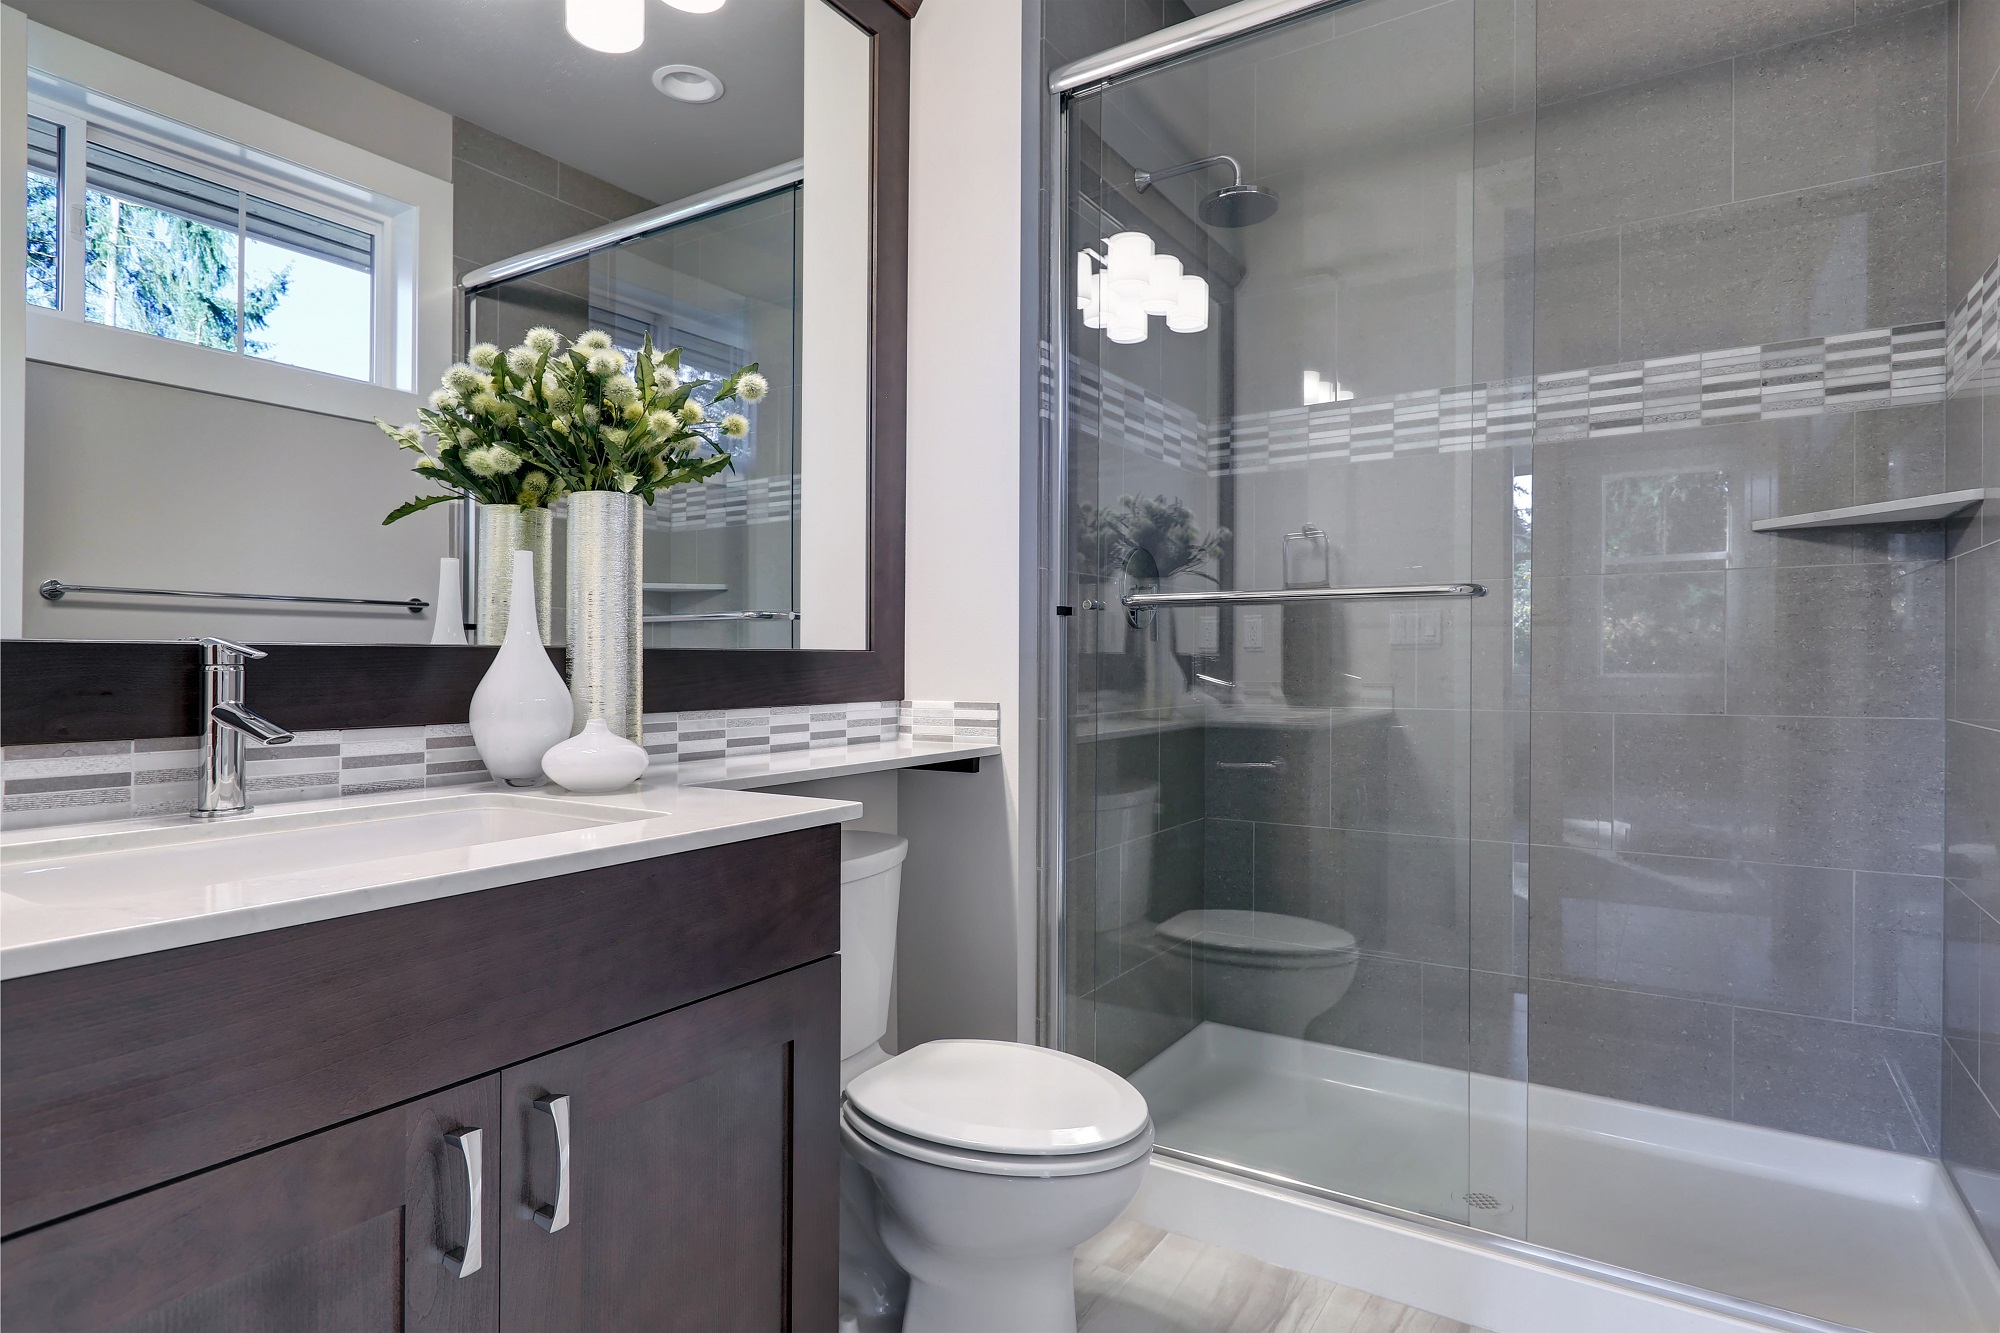 Bathroom Remodeling Contractor in Rocky Hill, CT